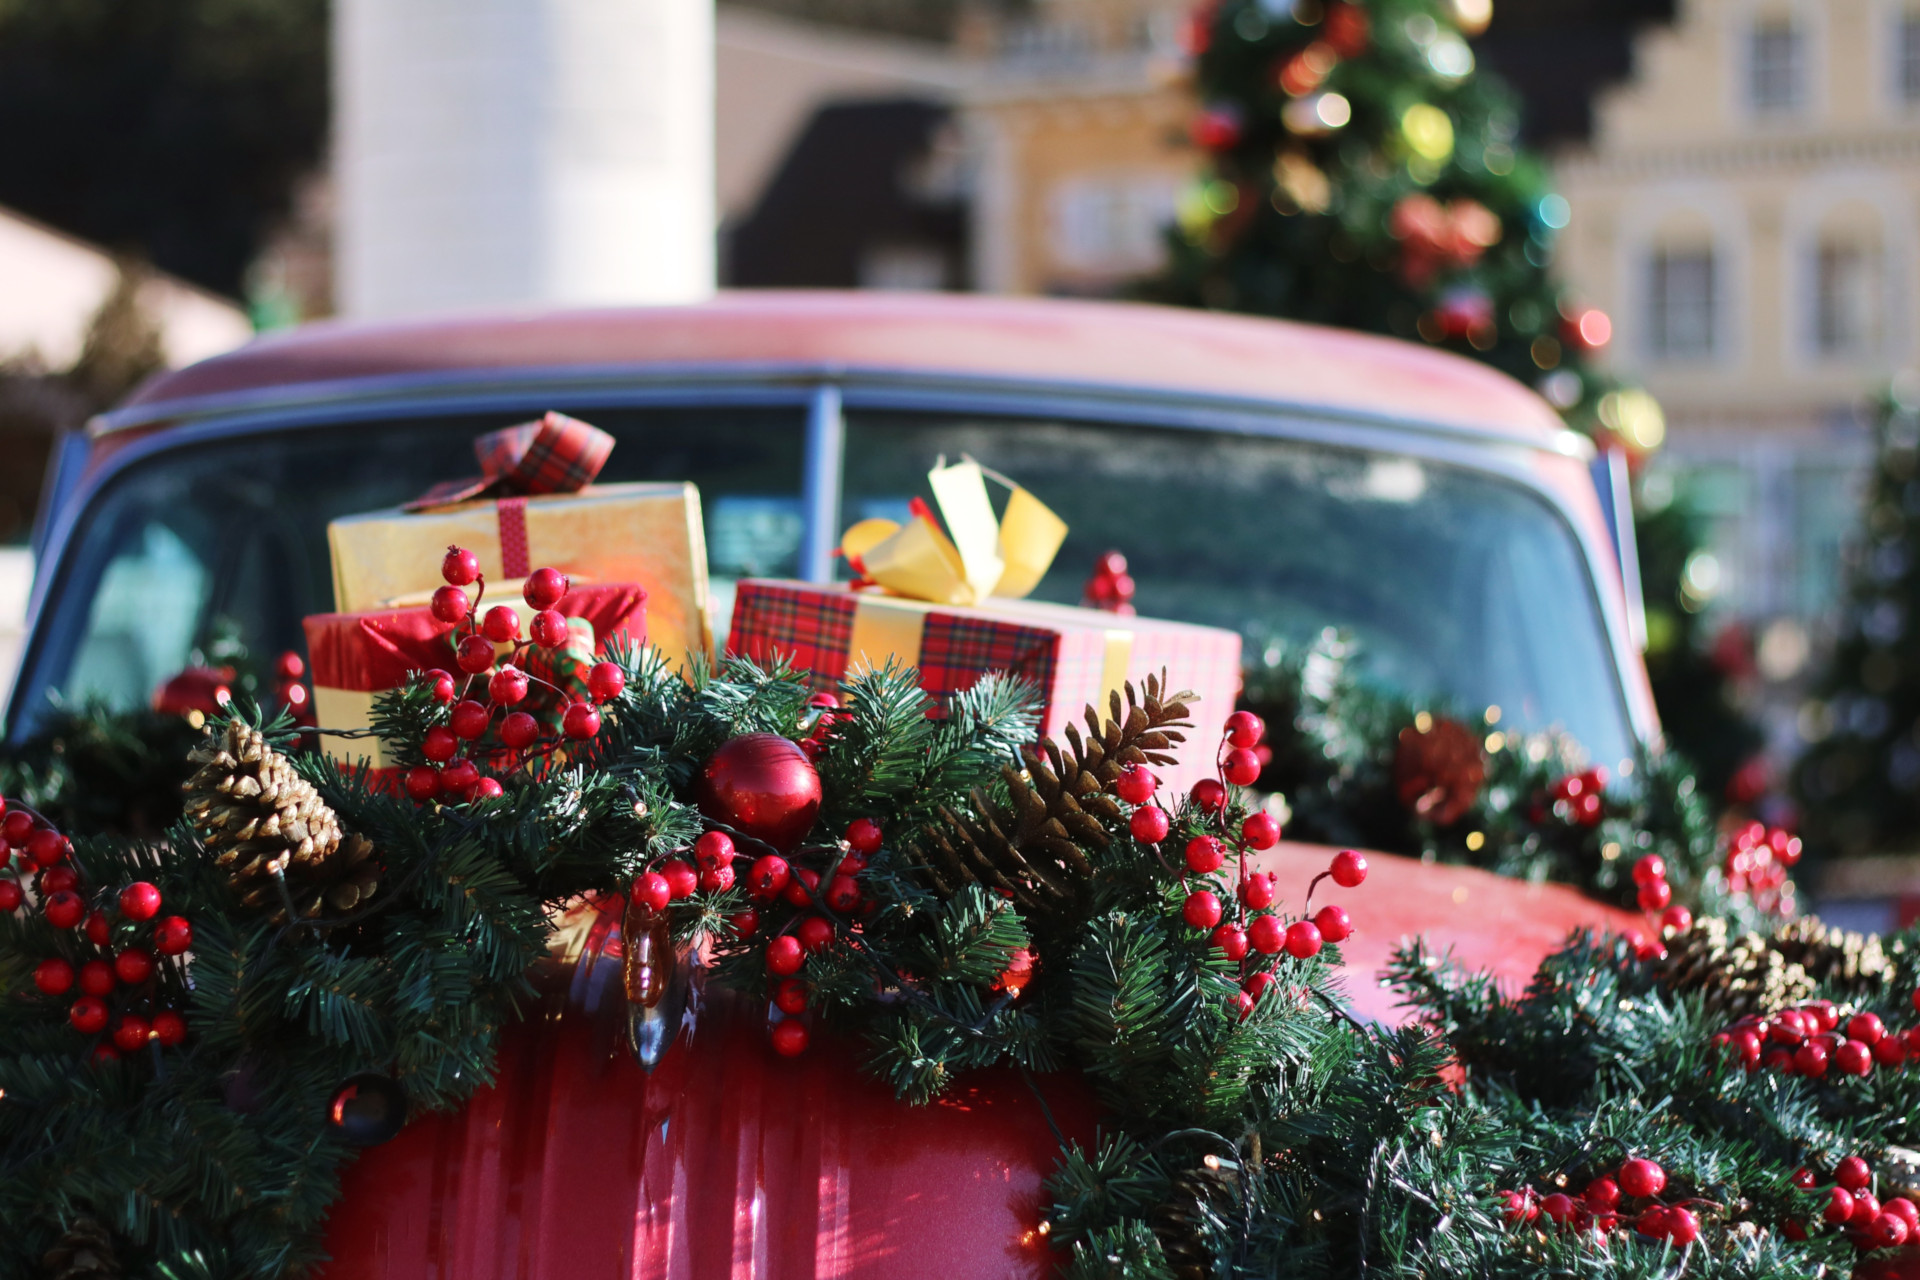 Red car with presents and wreaths on the bonnet